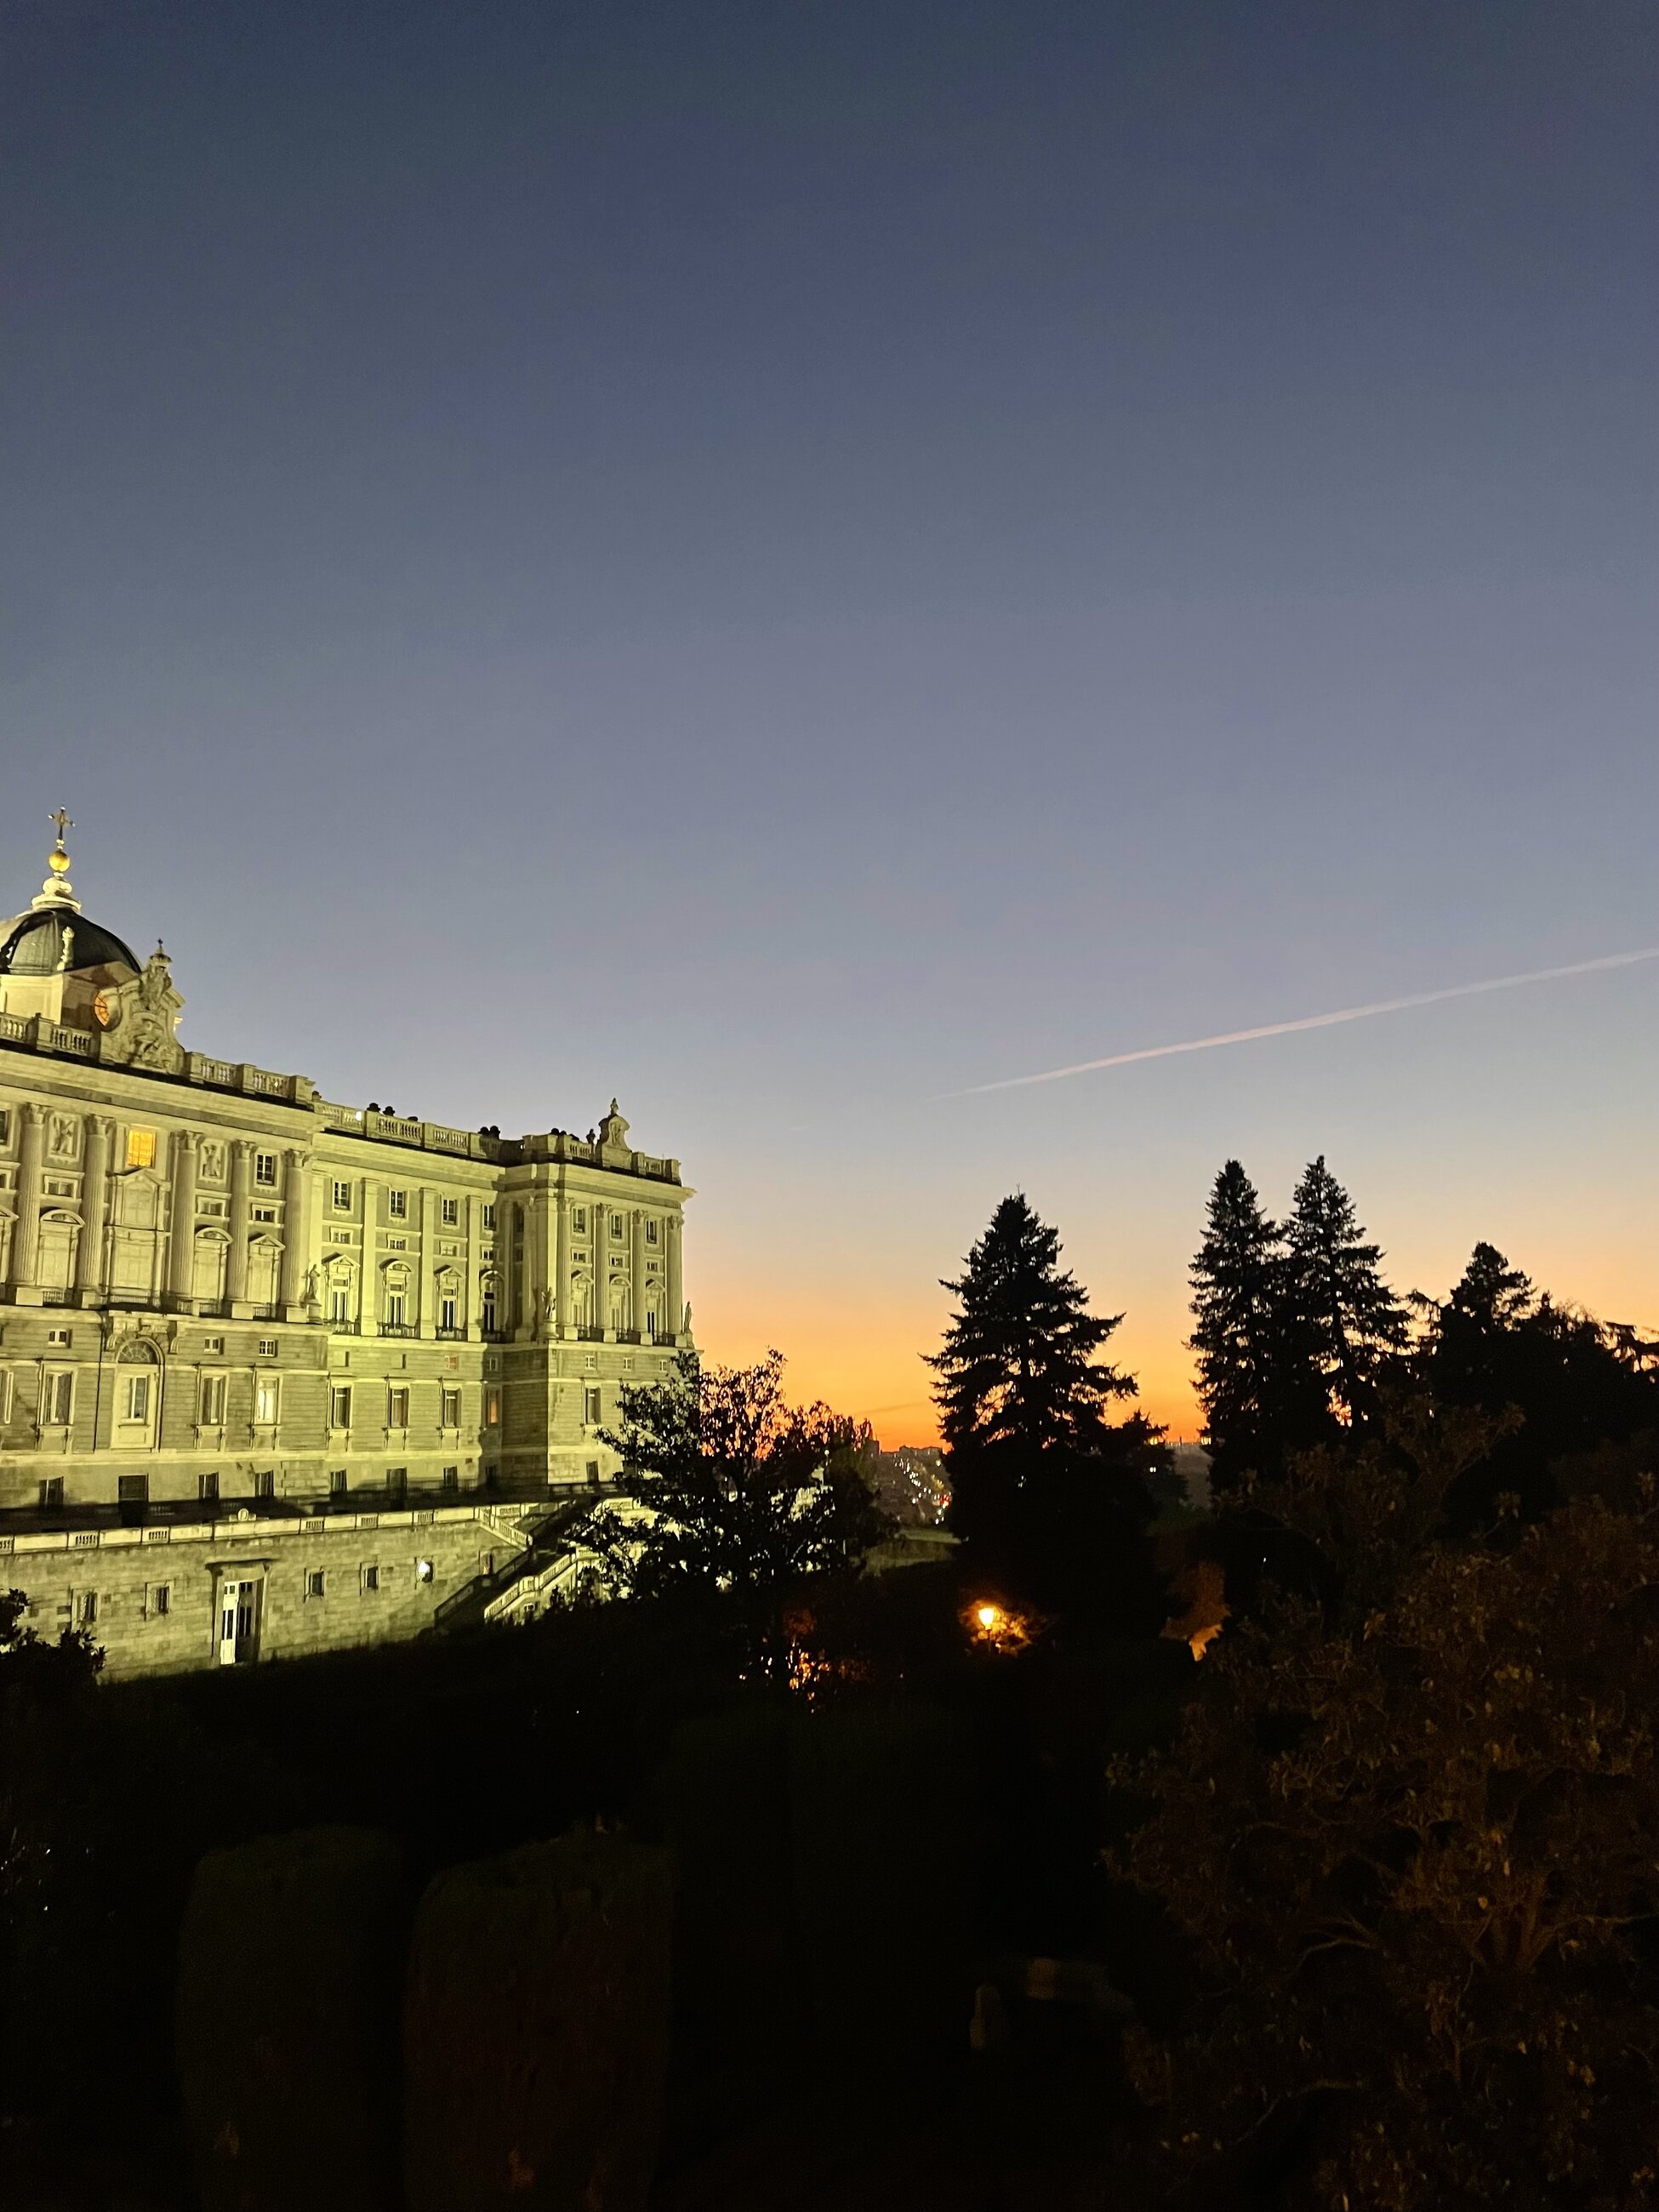 The Royal Palace during Sunset